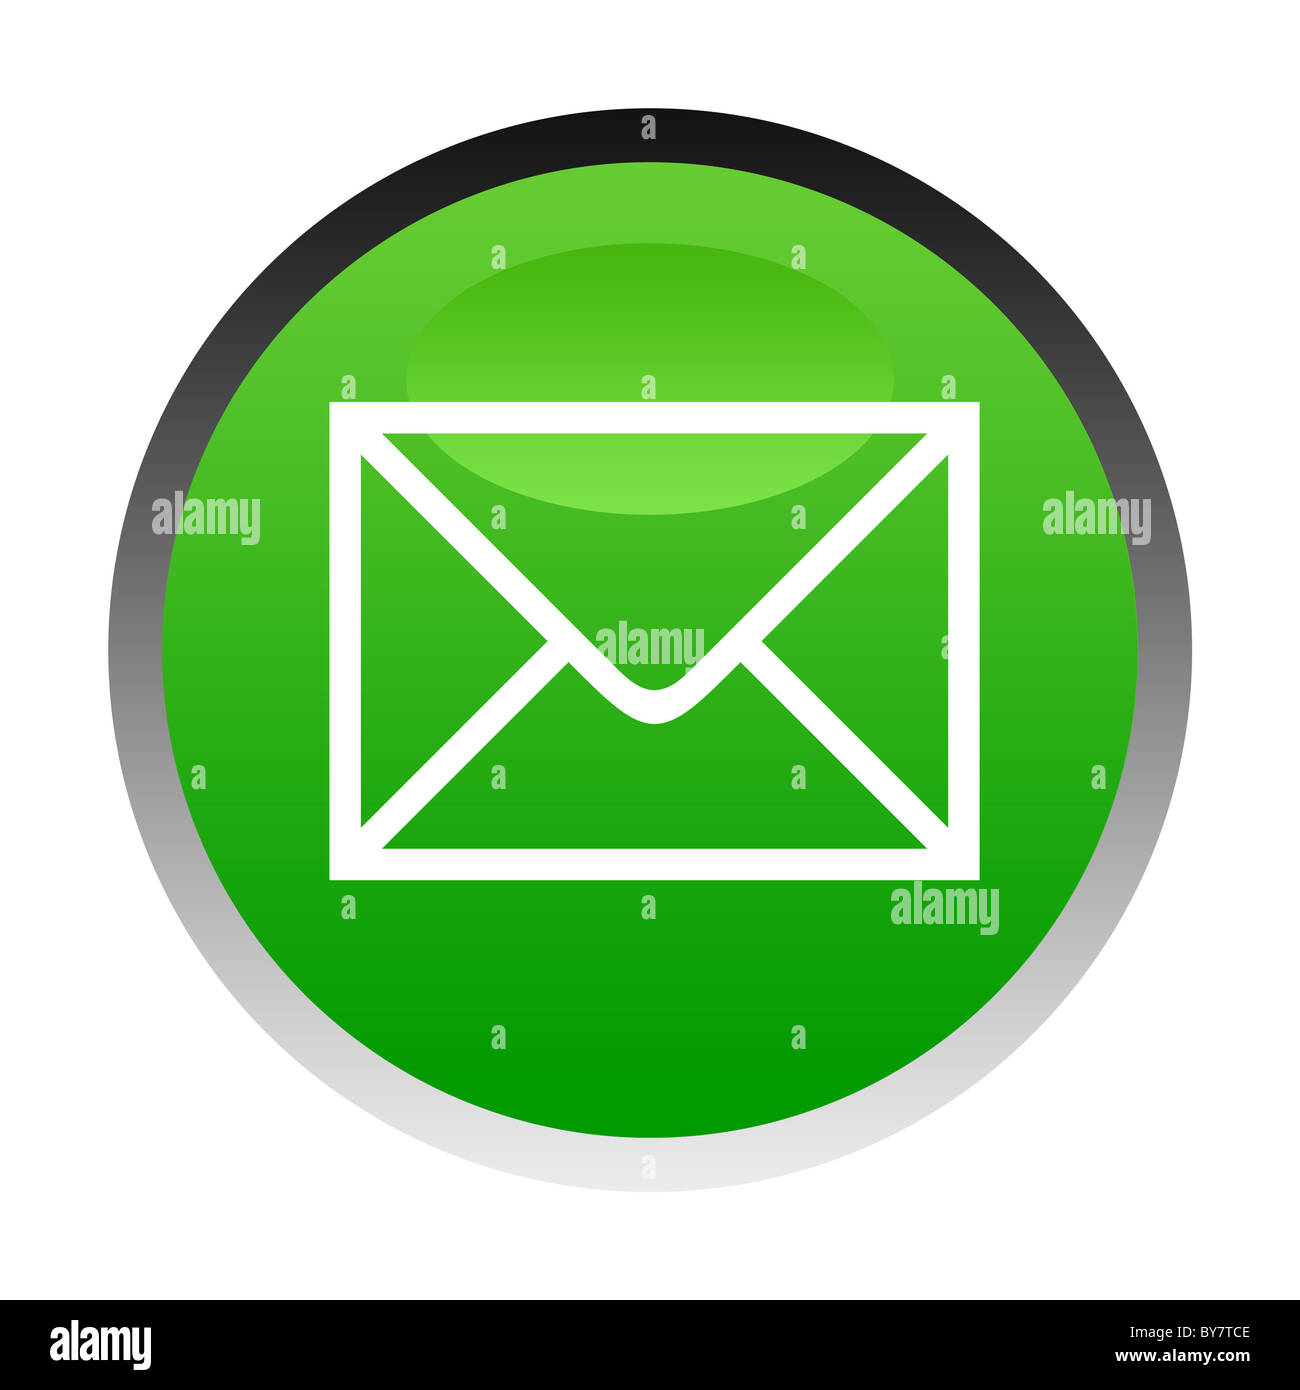 Illustration of green email or post button isolated on white background. Stock Photo